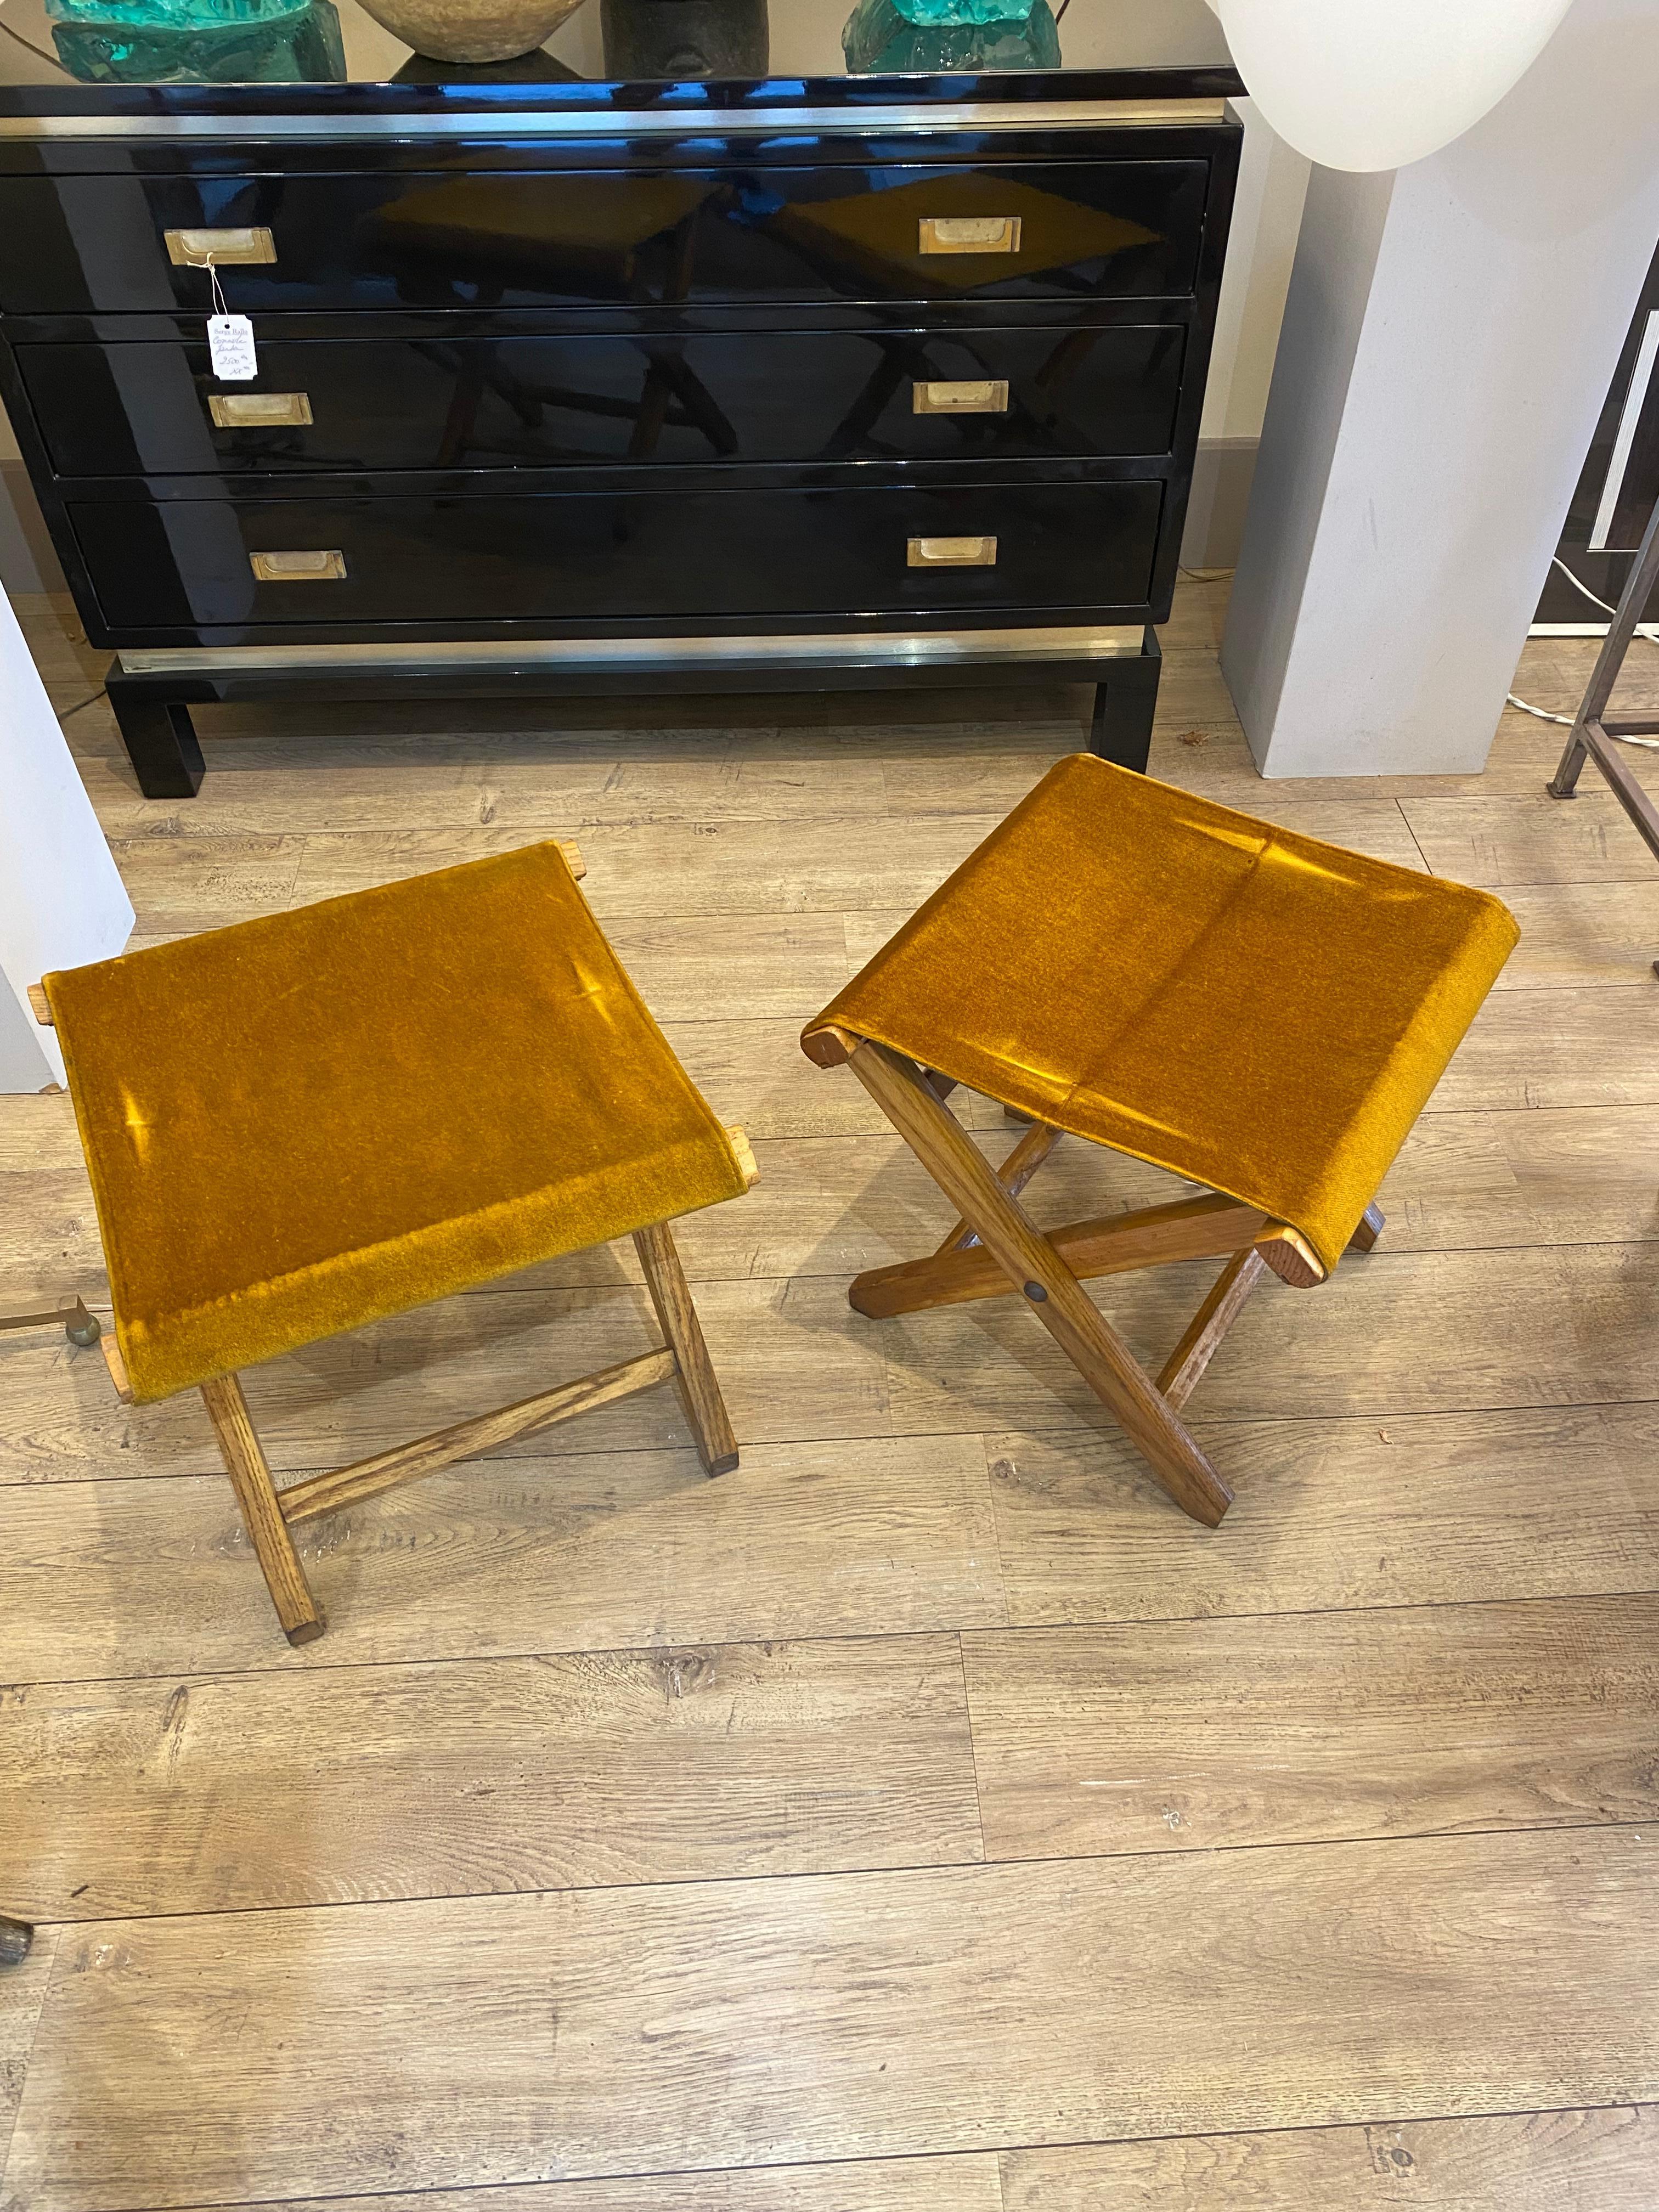 pair of stained beech, walnut stools. This is the foldable stool. The seat is in brown velvet. They were made in Italy around the 1950s easy to transport commercially, I offer transport. They can go very well in a bedroom or opposite a sofa, two